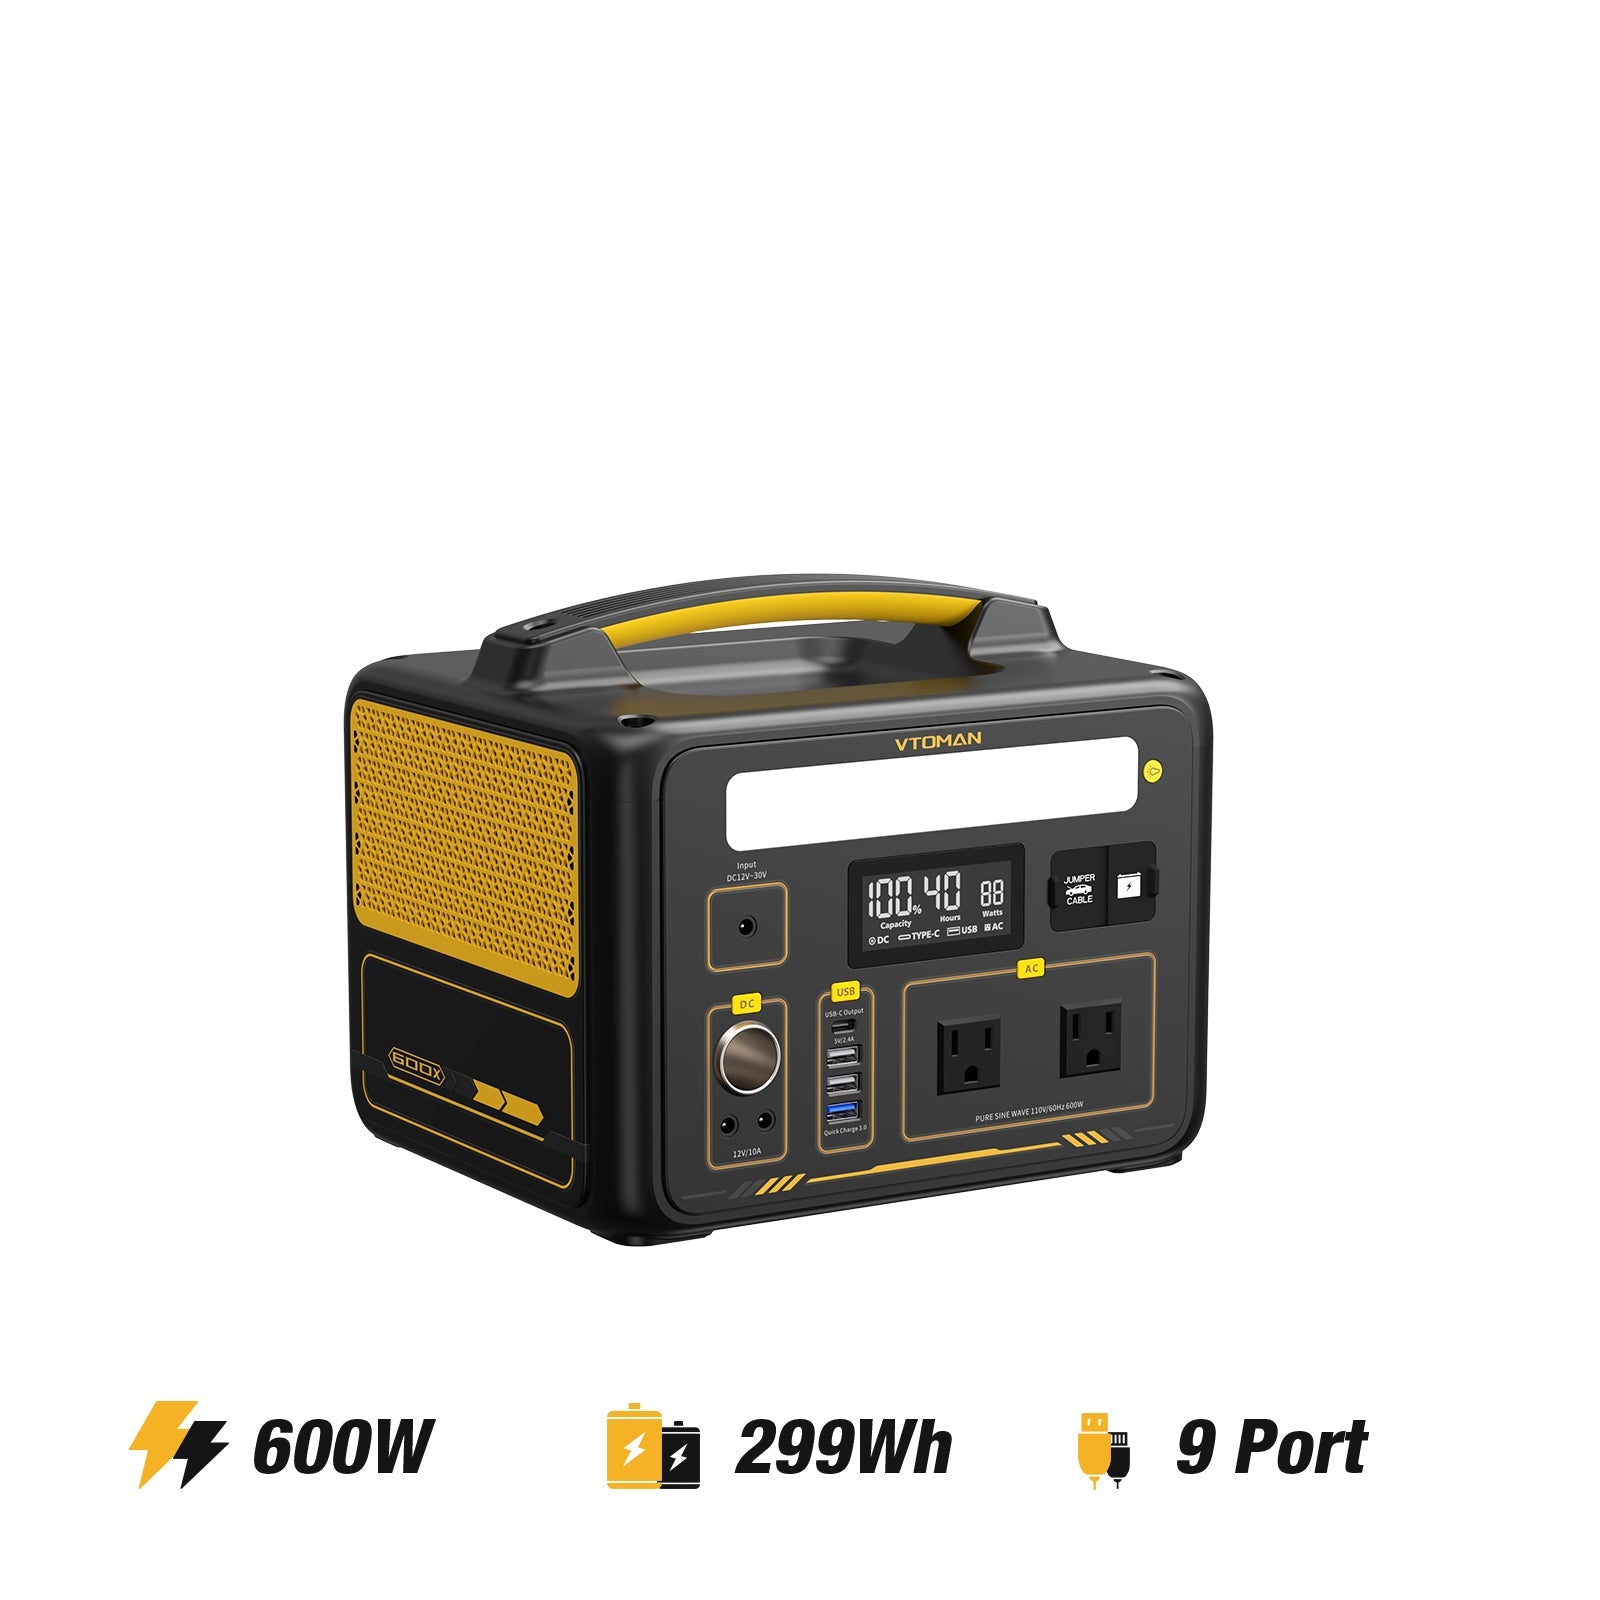 jump 600x power station-600w-299wh-9 ports